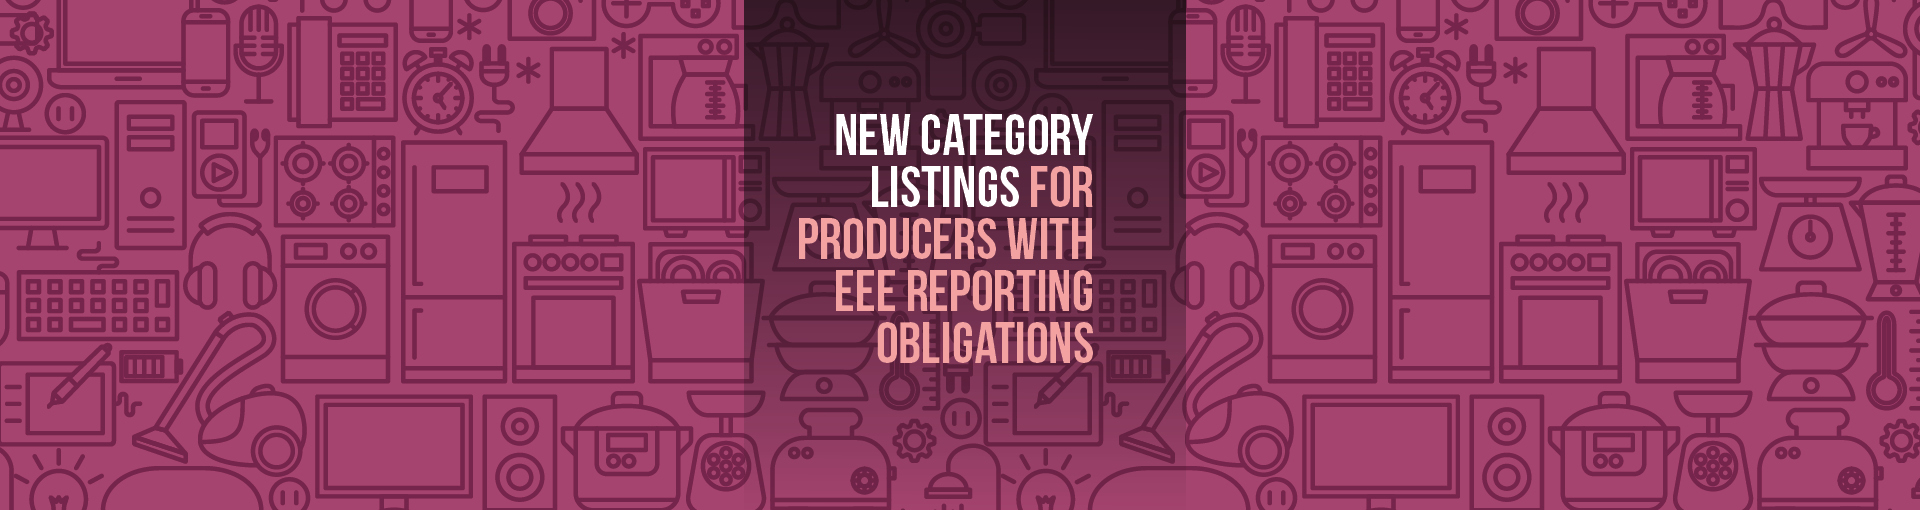 Producer Register Limited (PRL) recently published the latest version of Category Listings